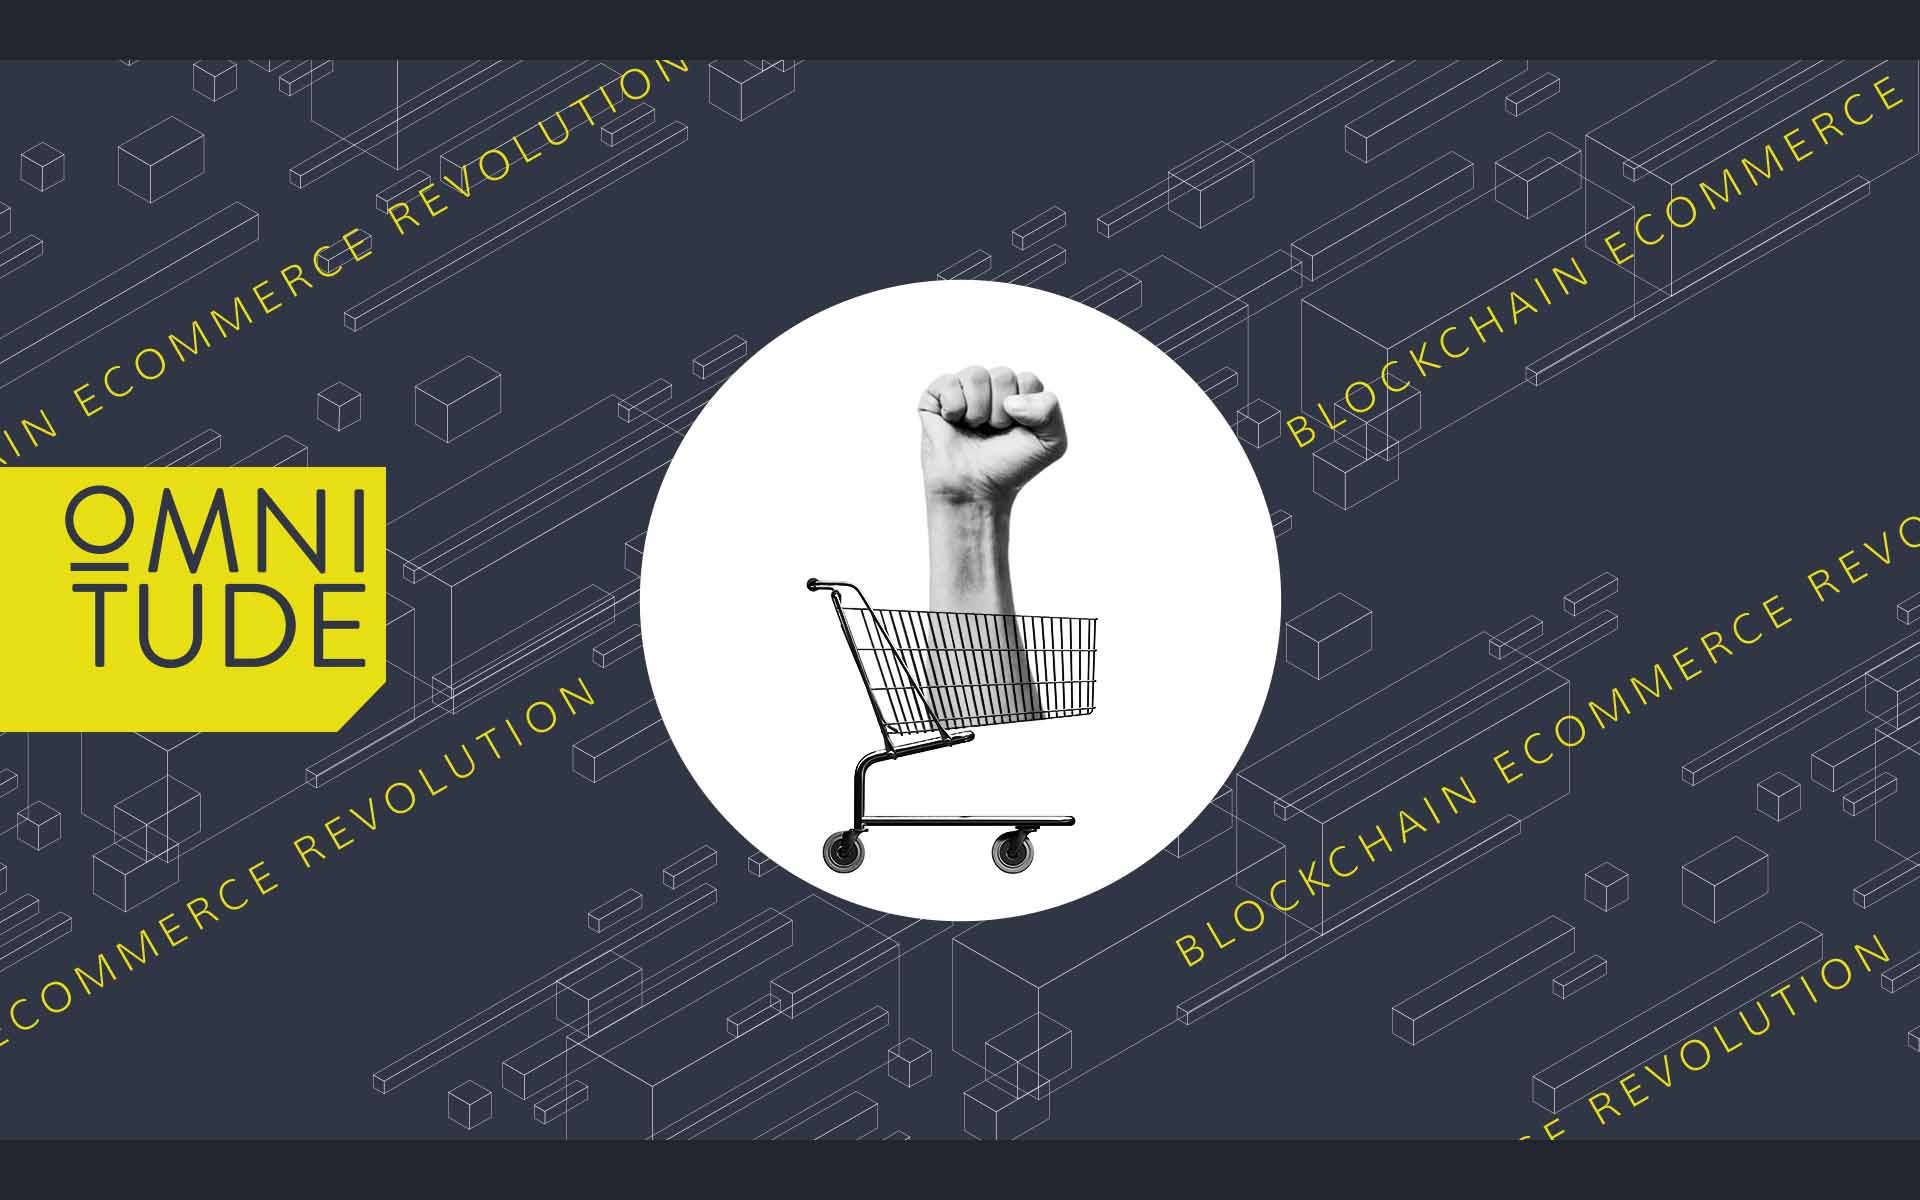 Omnitude Brings the Power of Hyperledger Technology to Enterprise Ecommerce with Its Smart Blockchain Platform